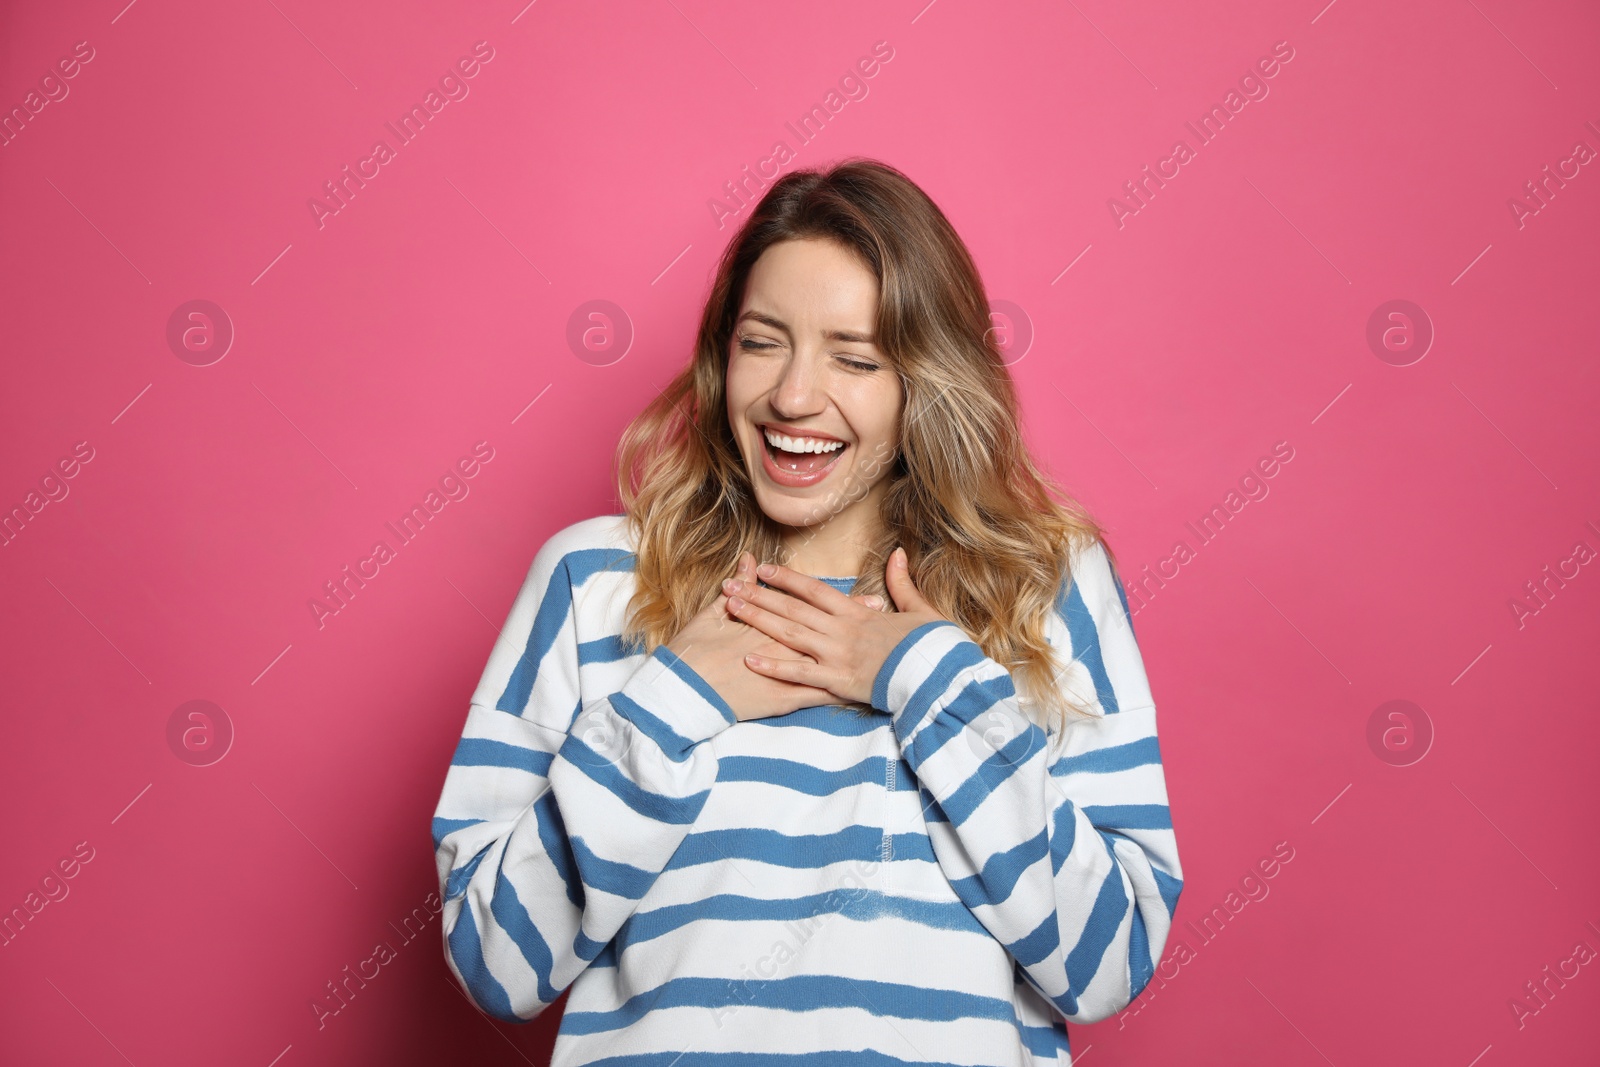 Photo of Cheerful young woman laughing on pink background